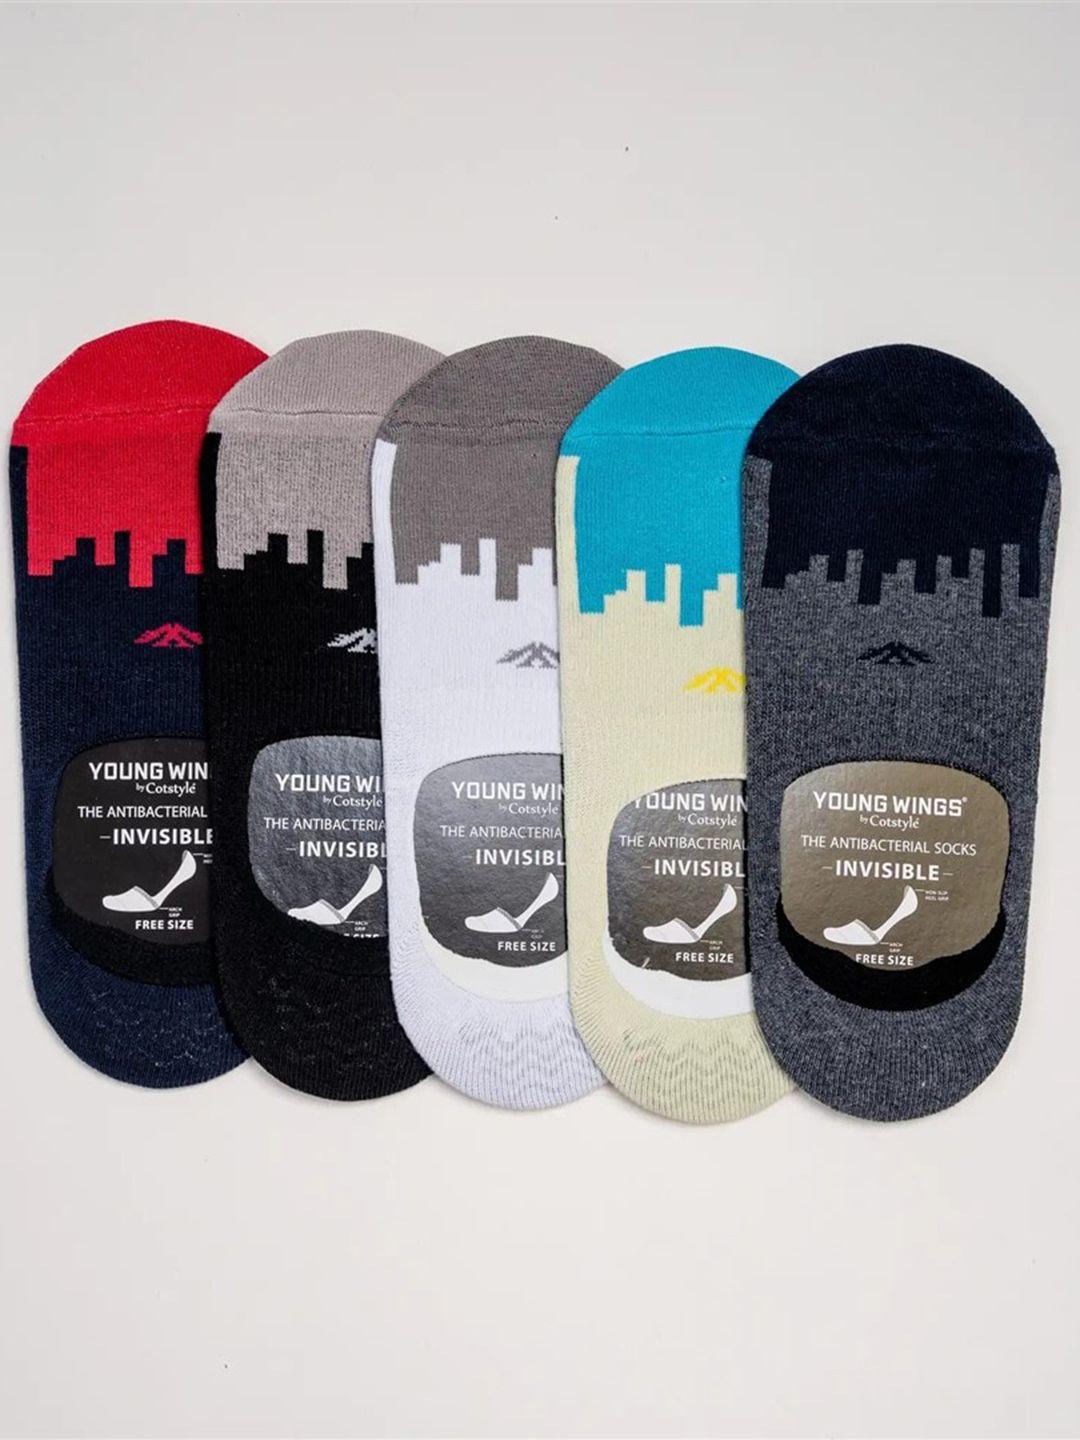 cotstyle men pack of 5 patterned no-show socks